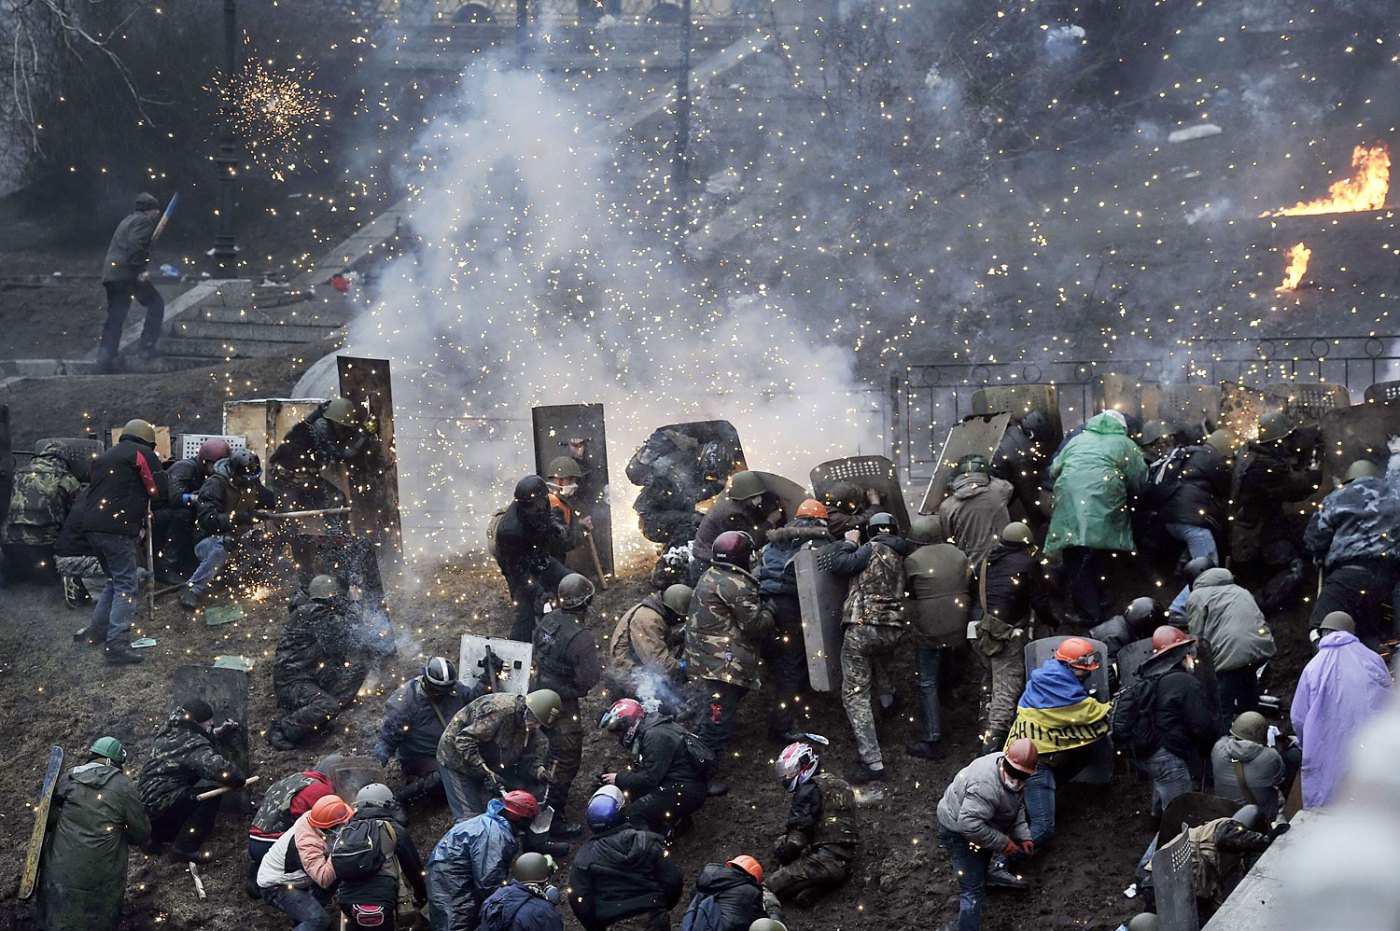 Protesters clash with police after gaining new positions near the Independence square in Kiev, Ukraine on February 20, 2014.